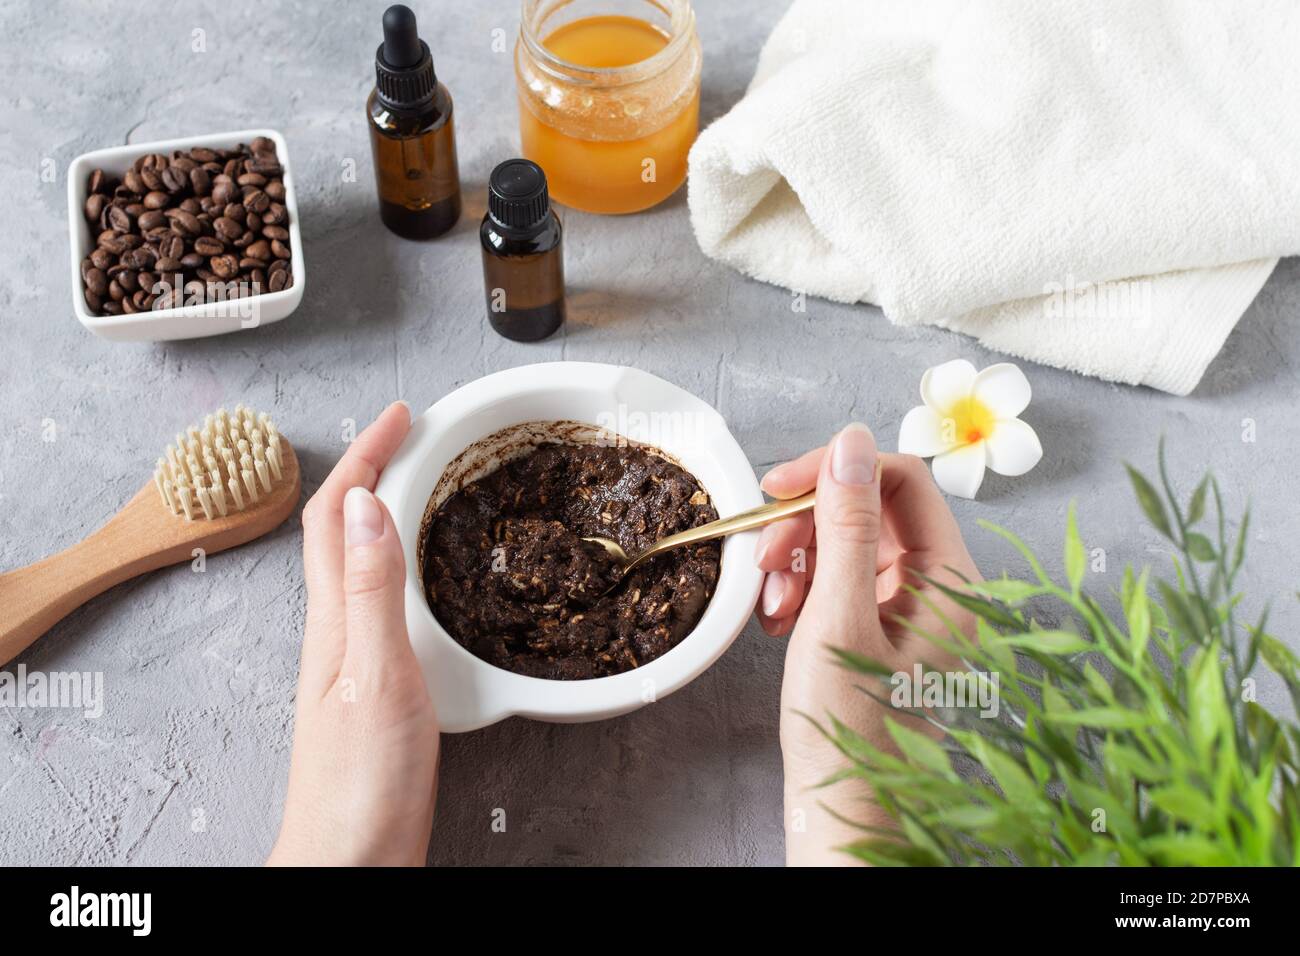 Homemade body scrub made with ground coffee, honey and oatmeal in a jar on gray concrete table. Self-care at home, eco homemade cosmetic for spa and s Stock Photo